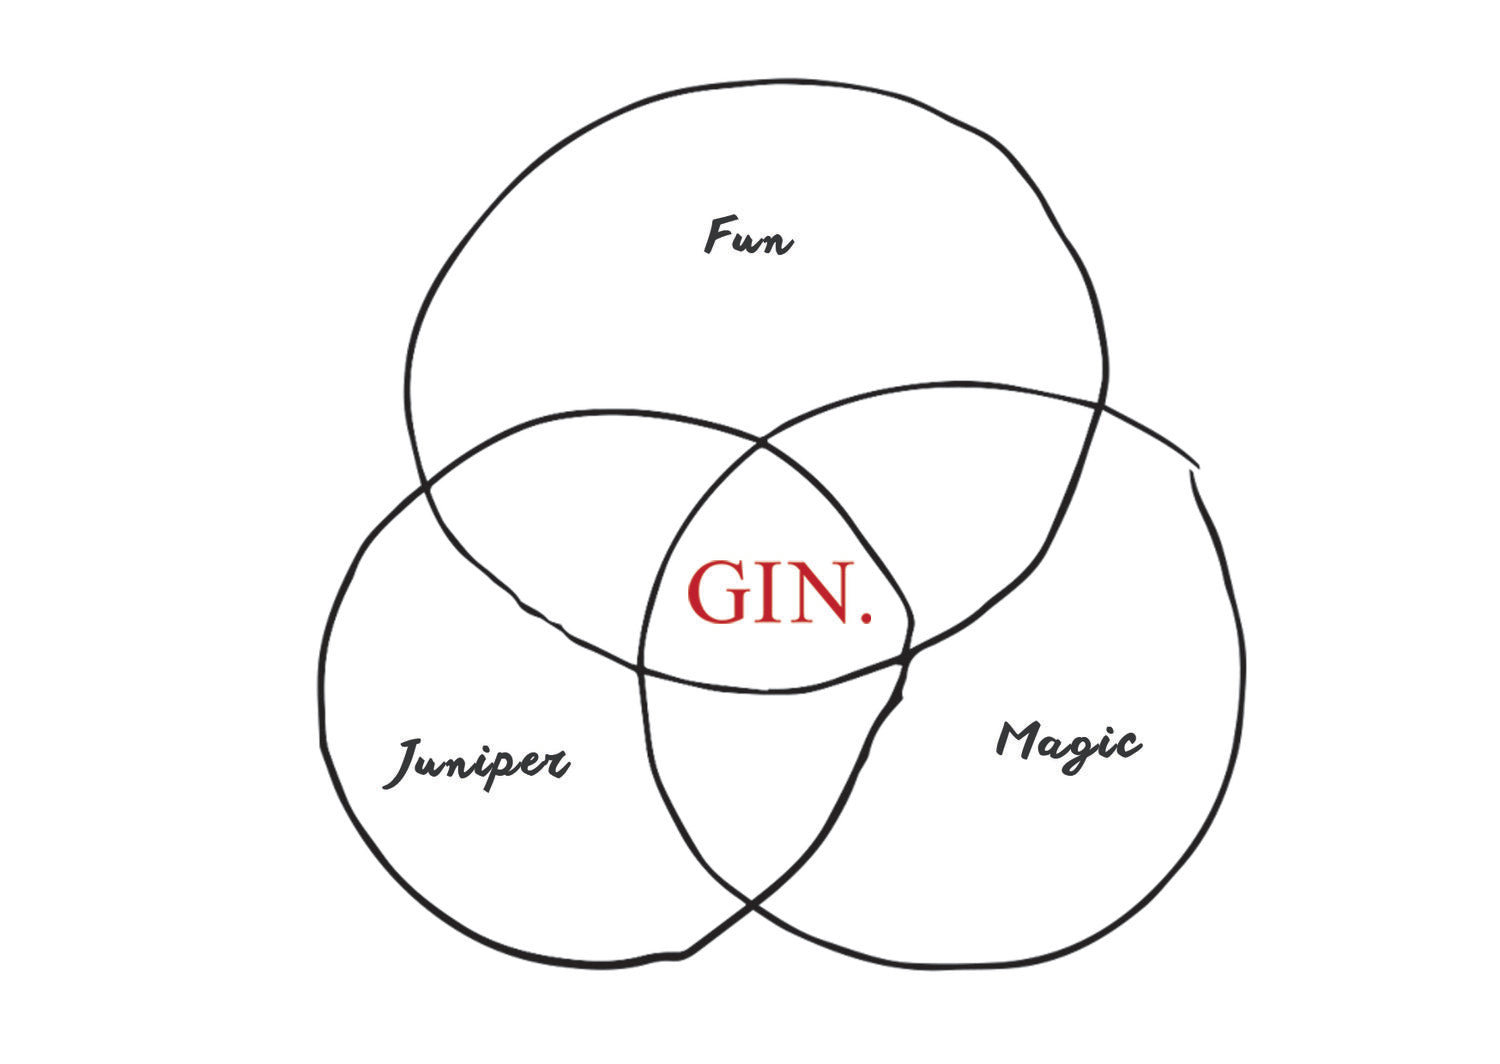 WHAT THE HECK IS GIN?